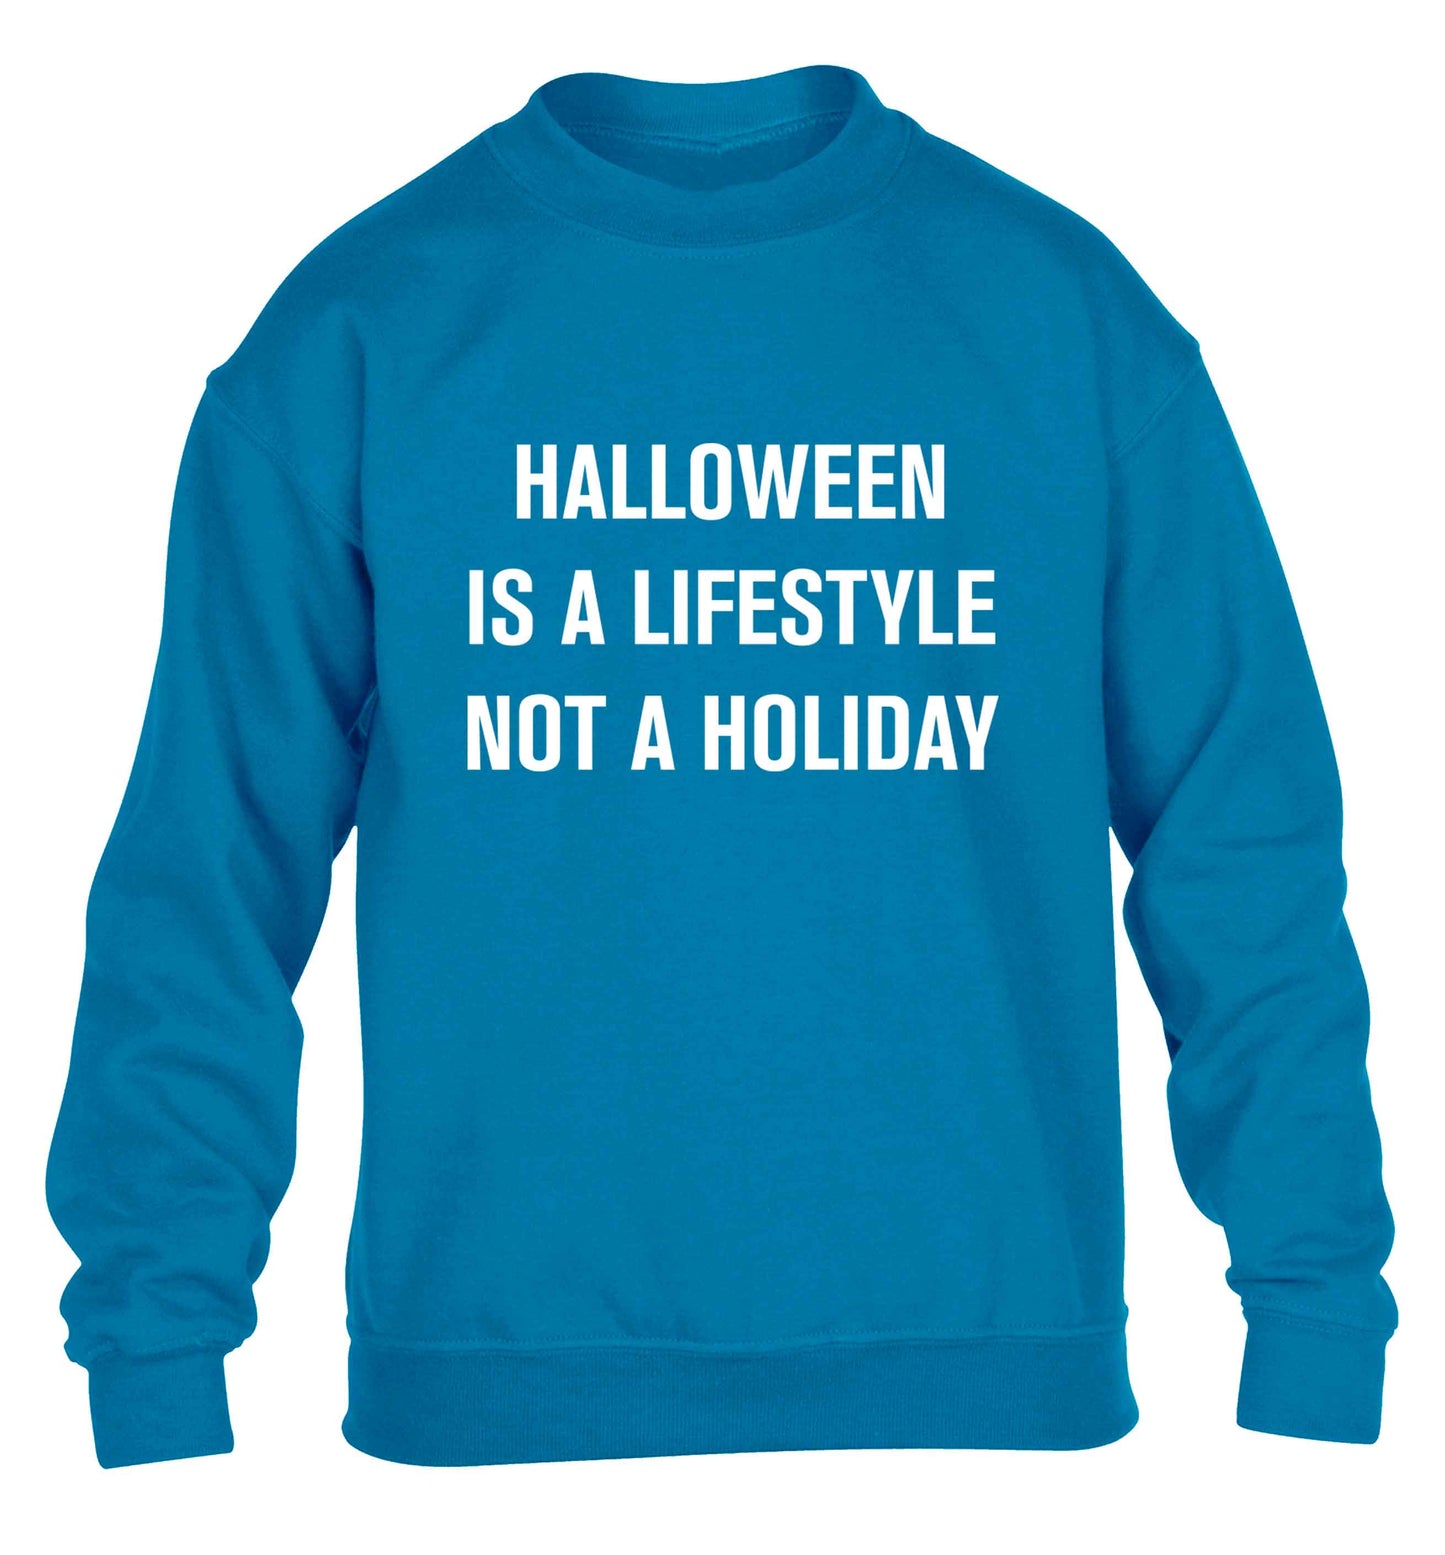 Halloween is a lifestyle not a holiday children's blue sweater 12-13 Years